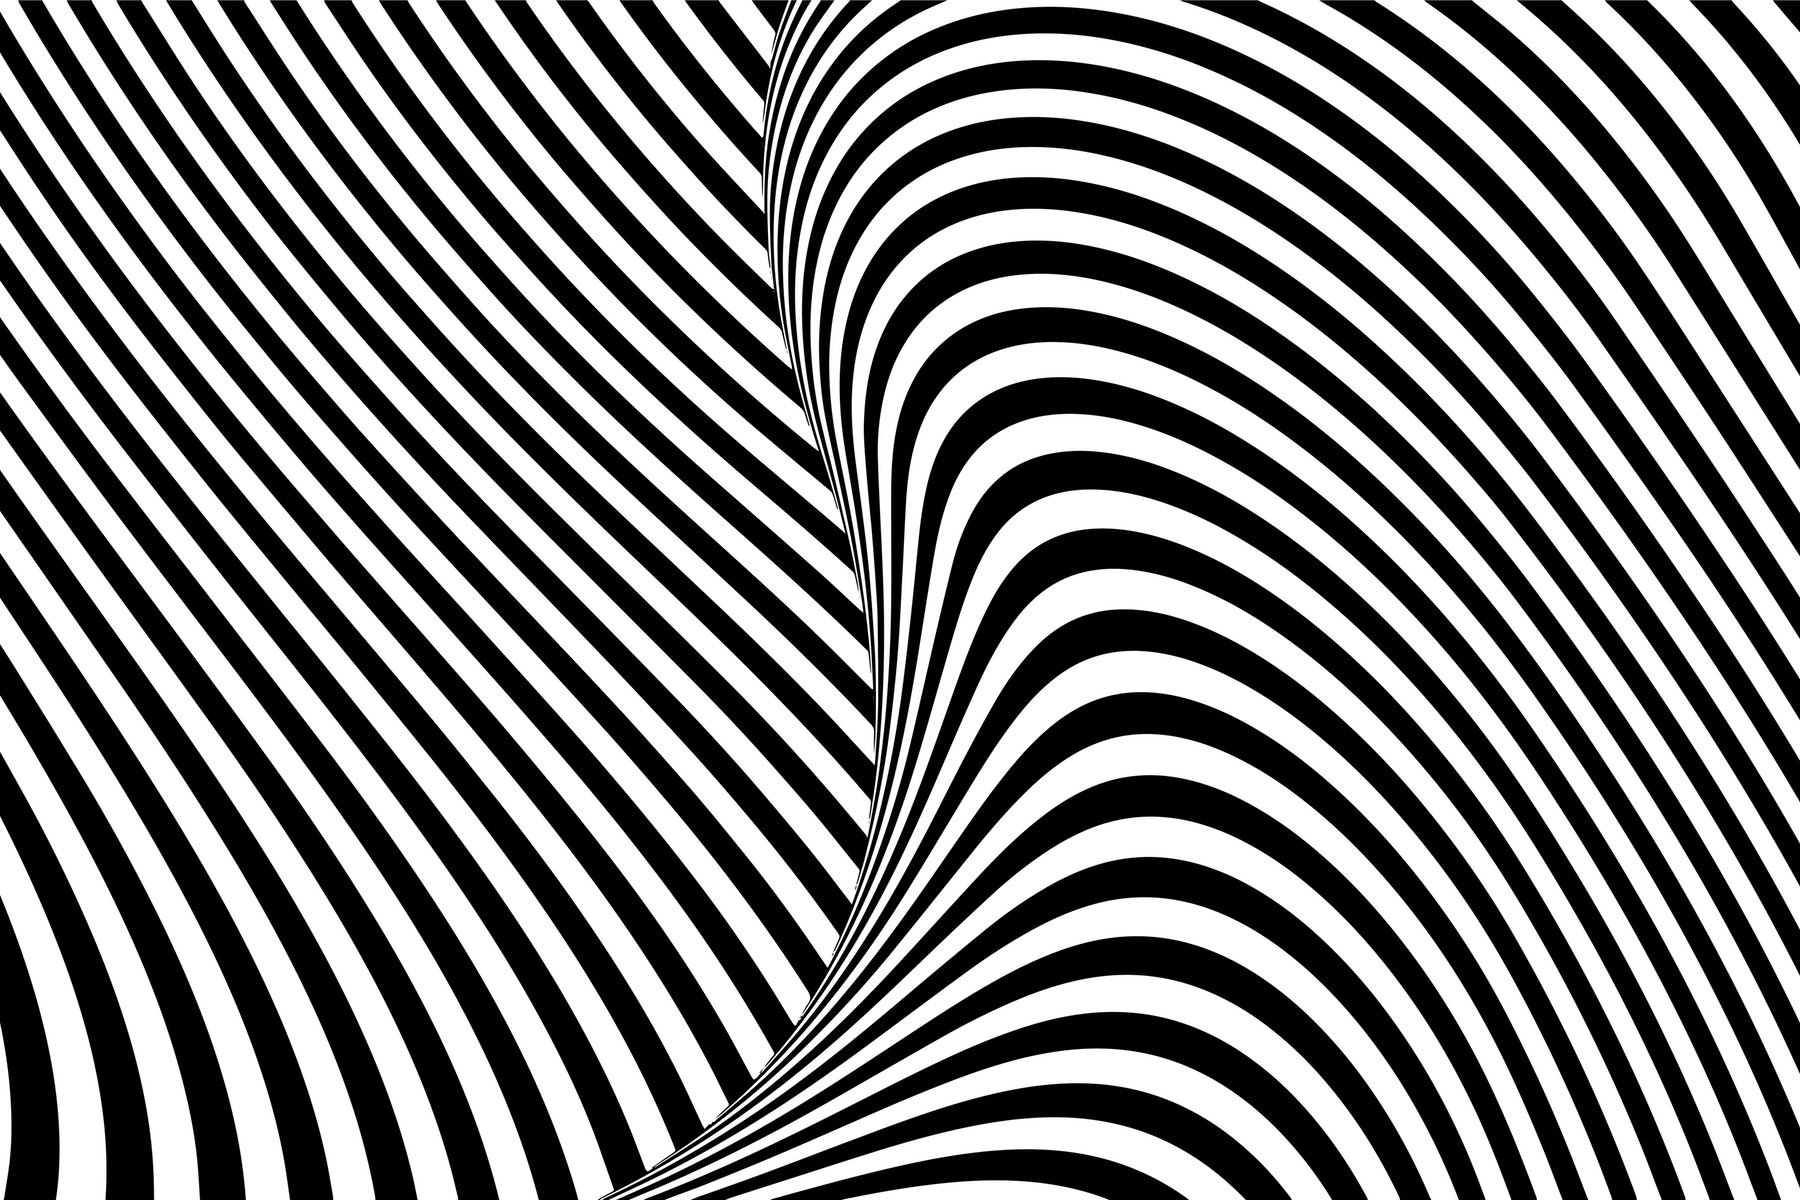 Buy Black And White Op Art wallpaper US shipping at Happywall.com